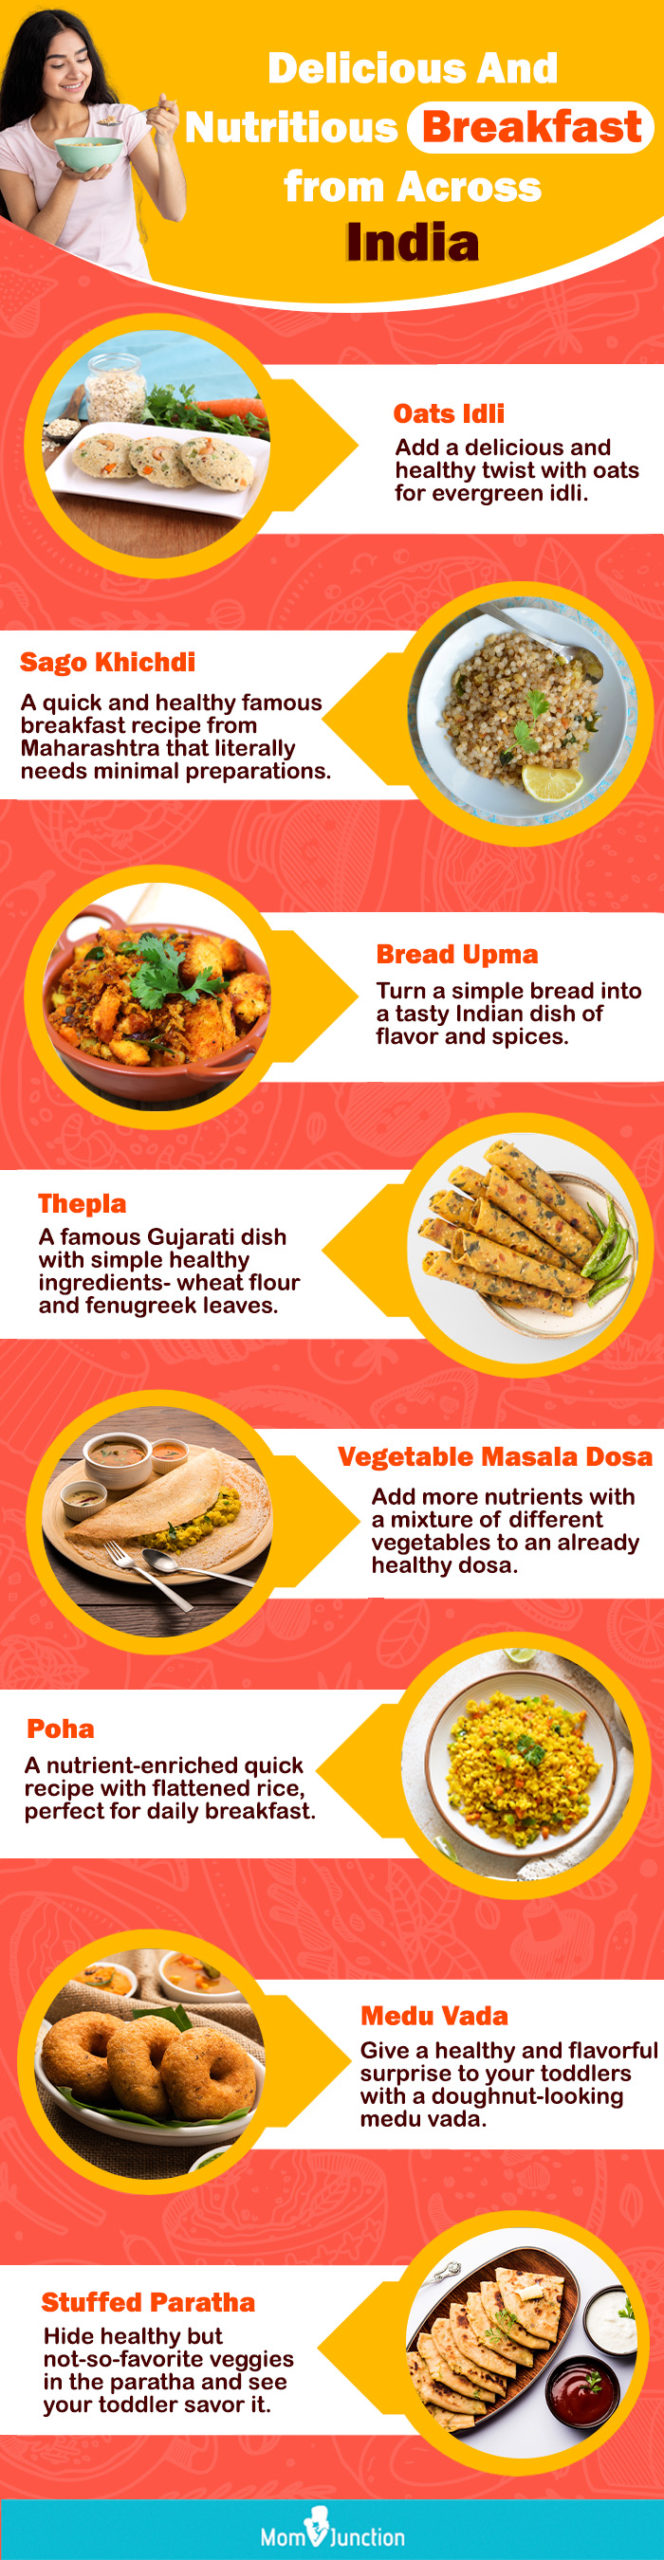 delicious and nutritious breakfast from across india (infographic)